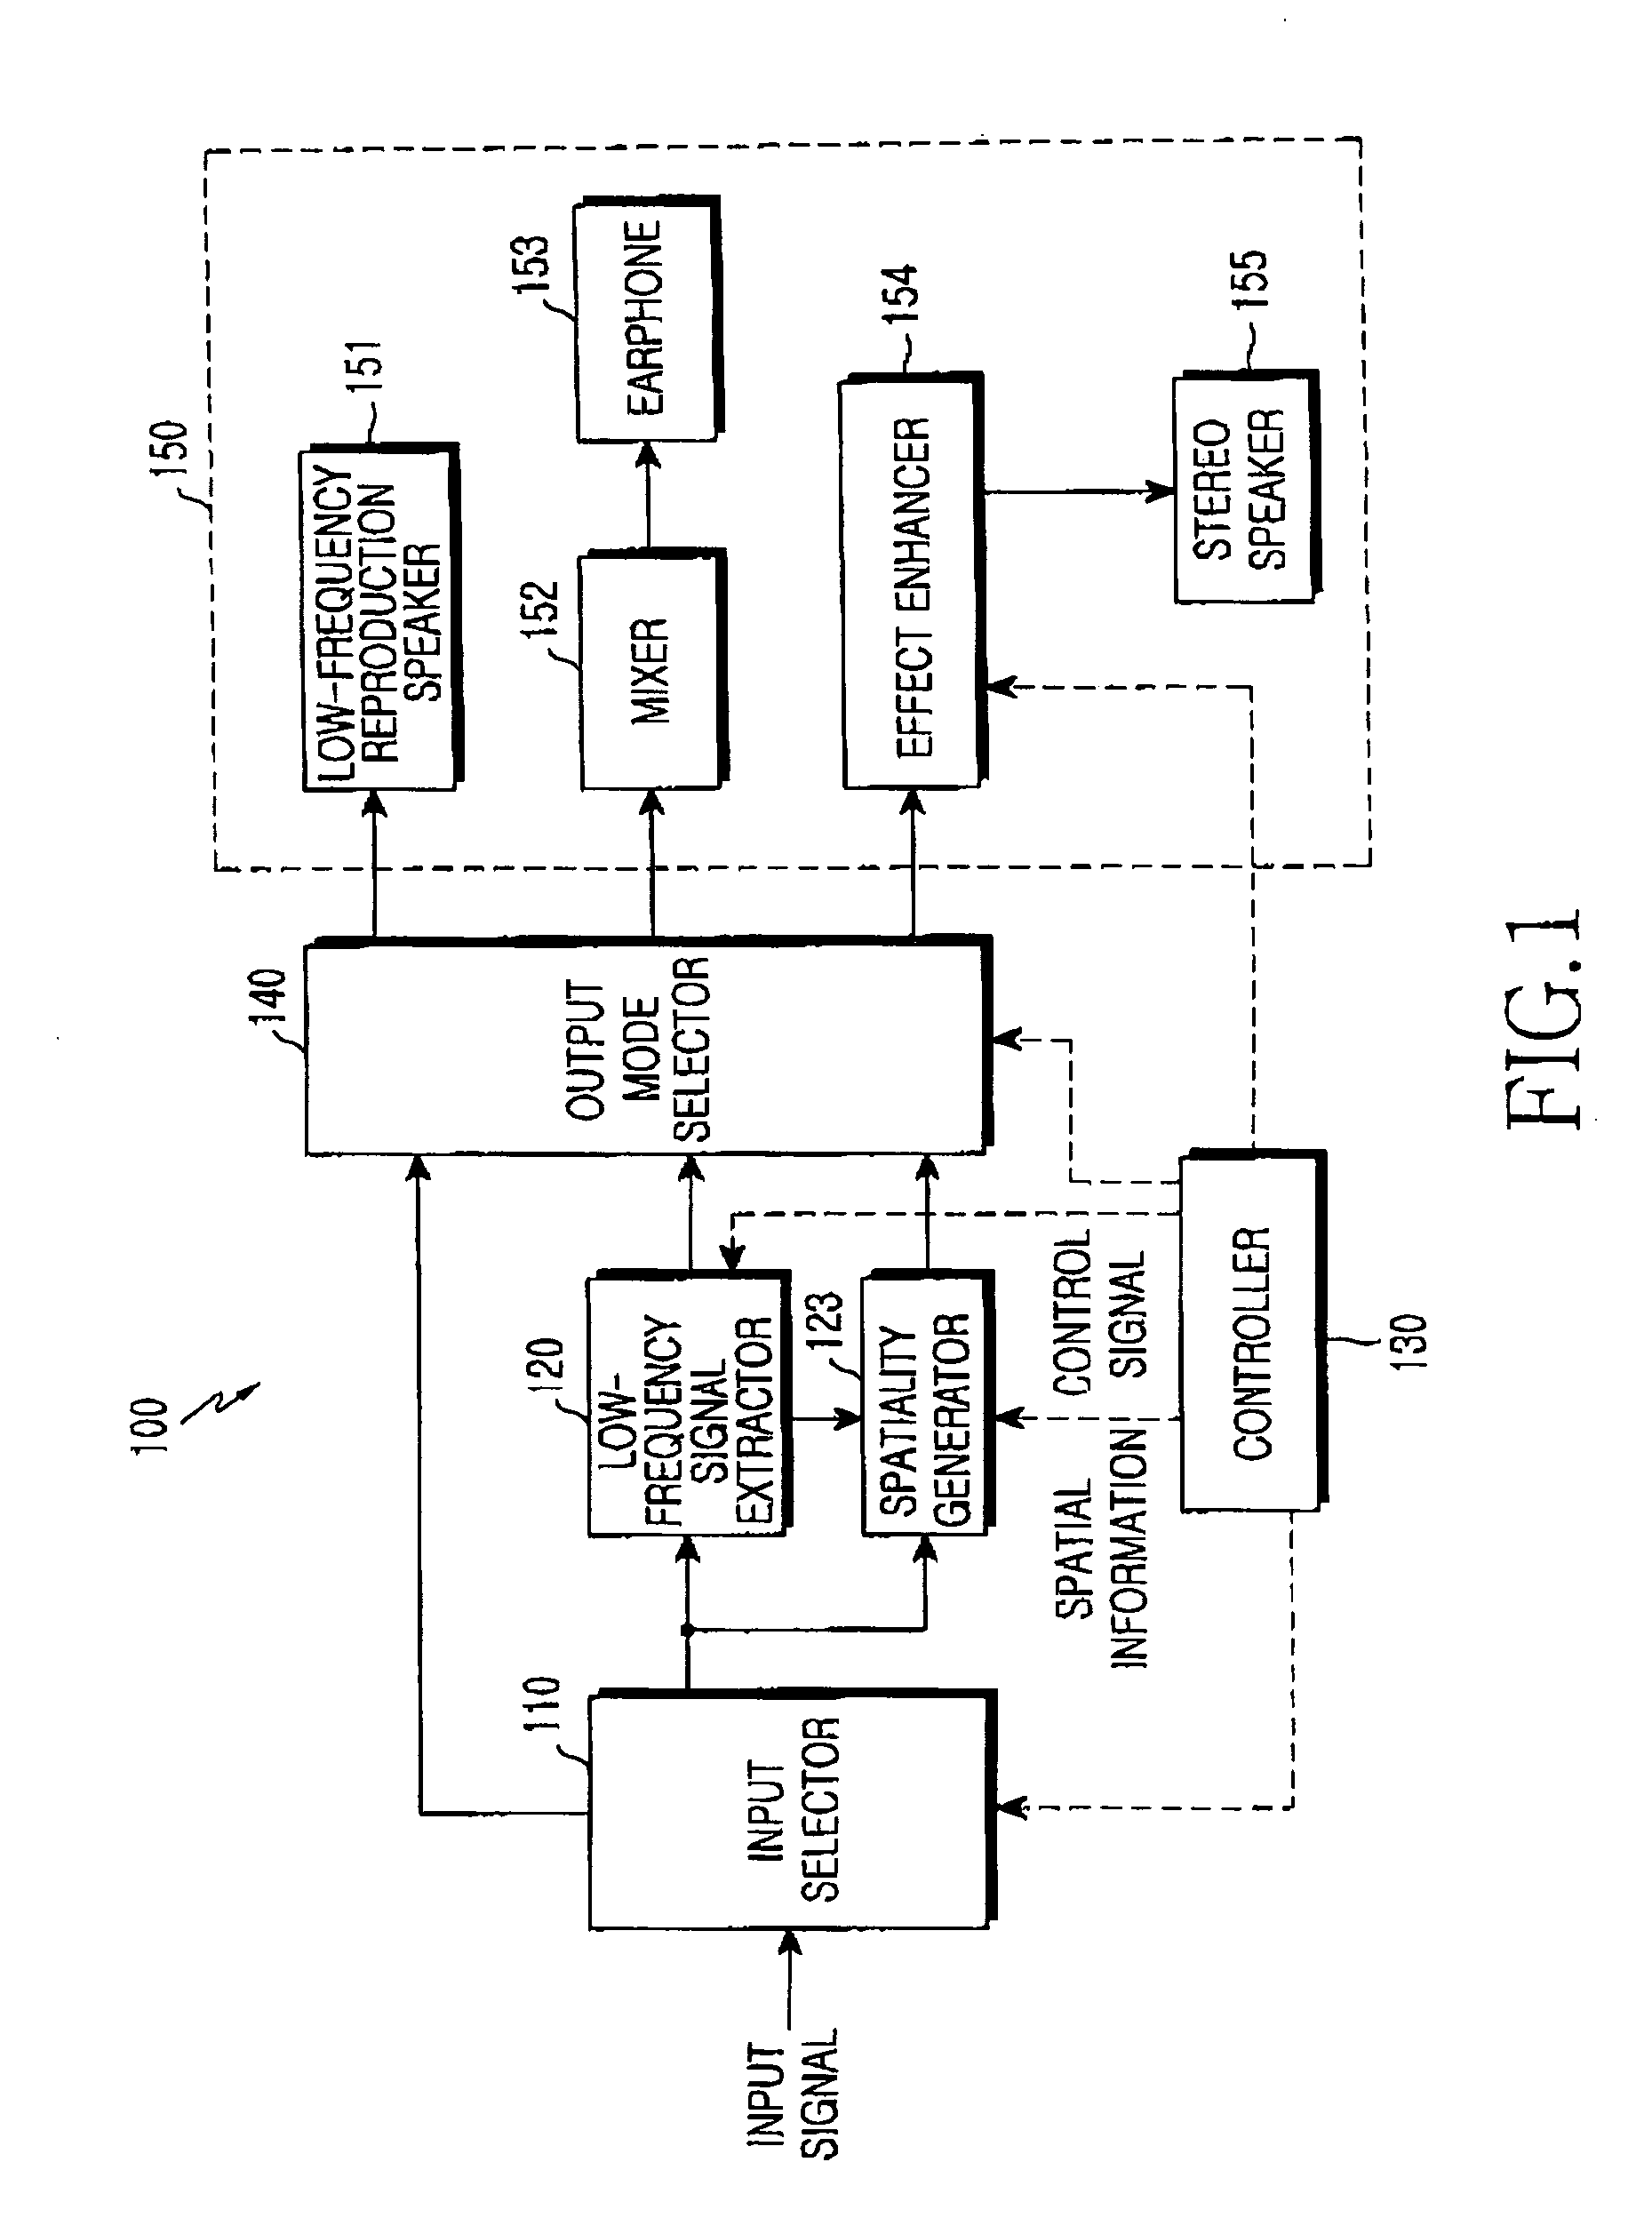 Apparatus and method for generating three-dimensional stereo sound in a mobile communication system